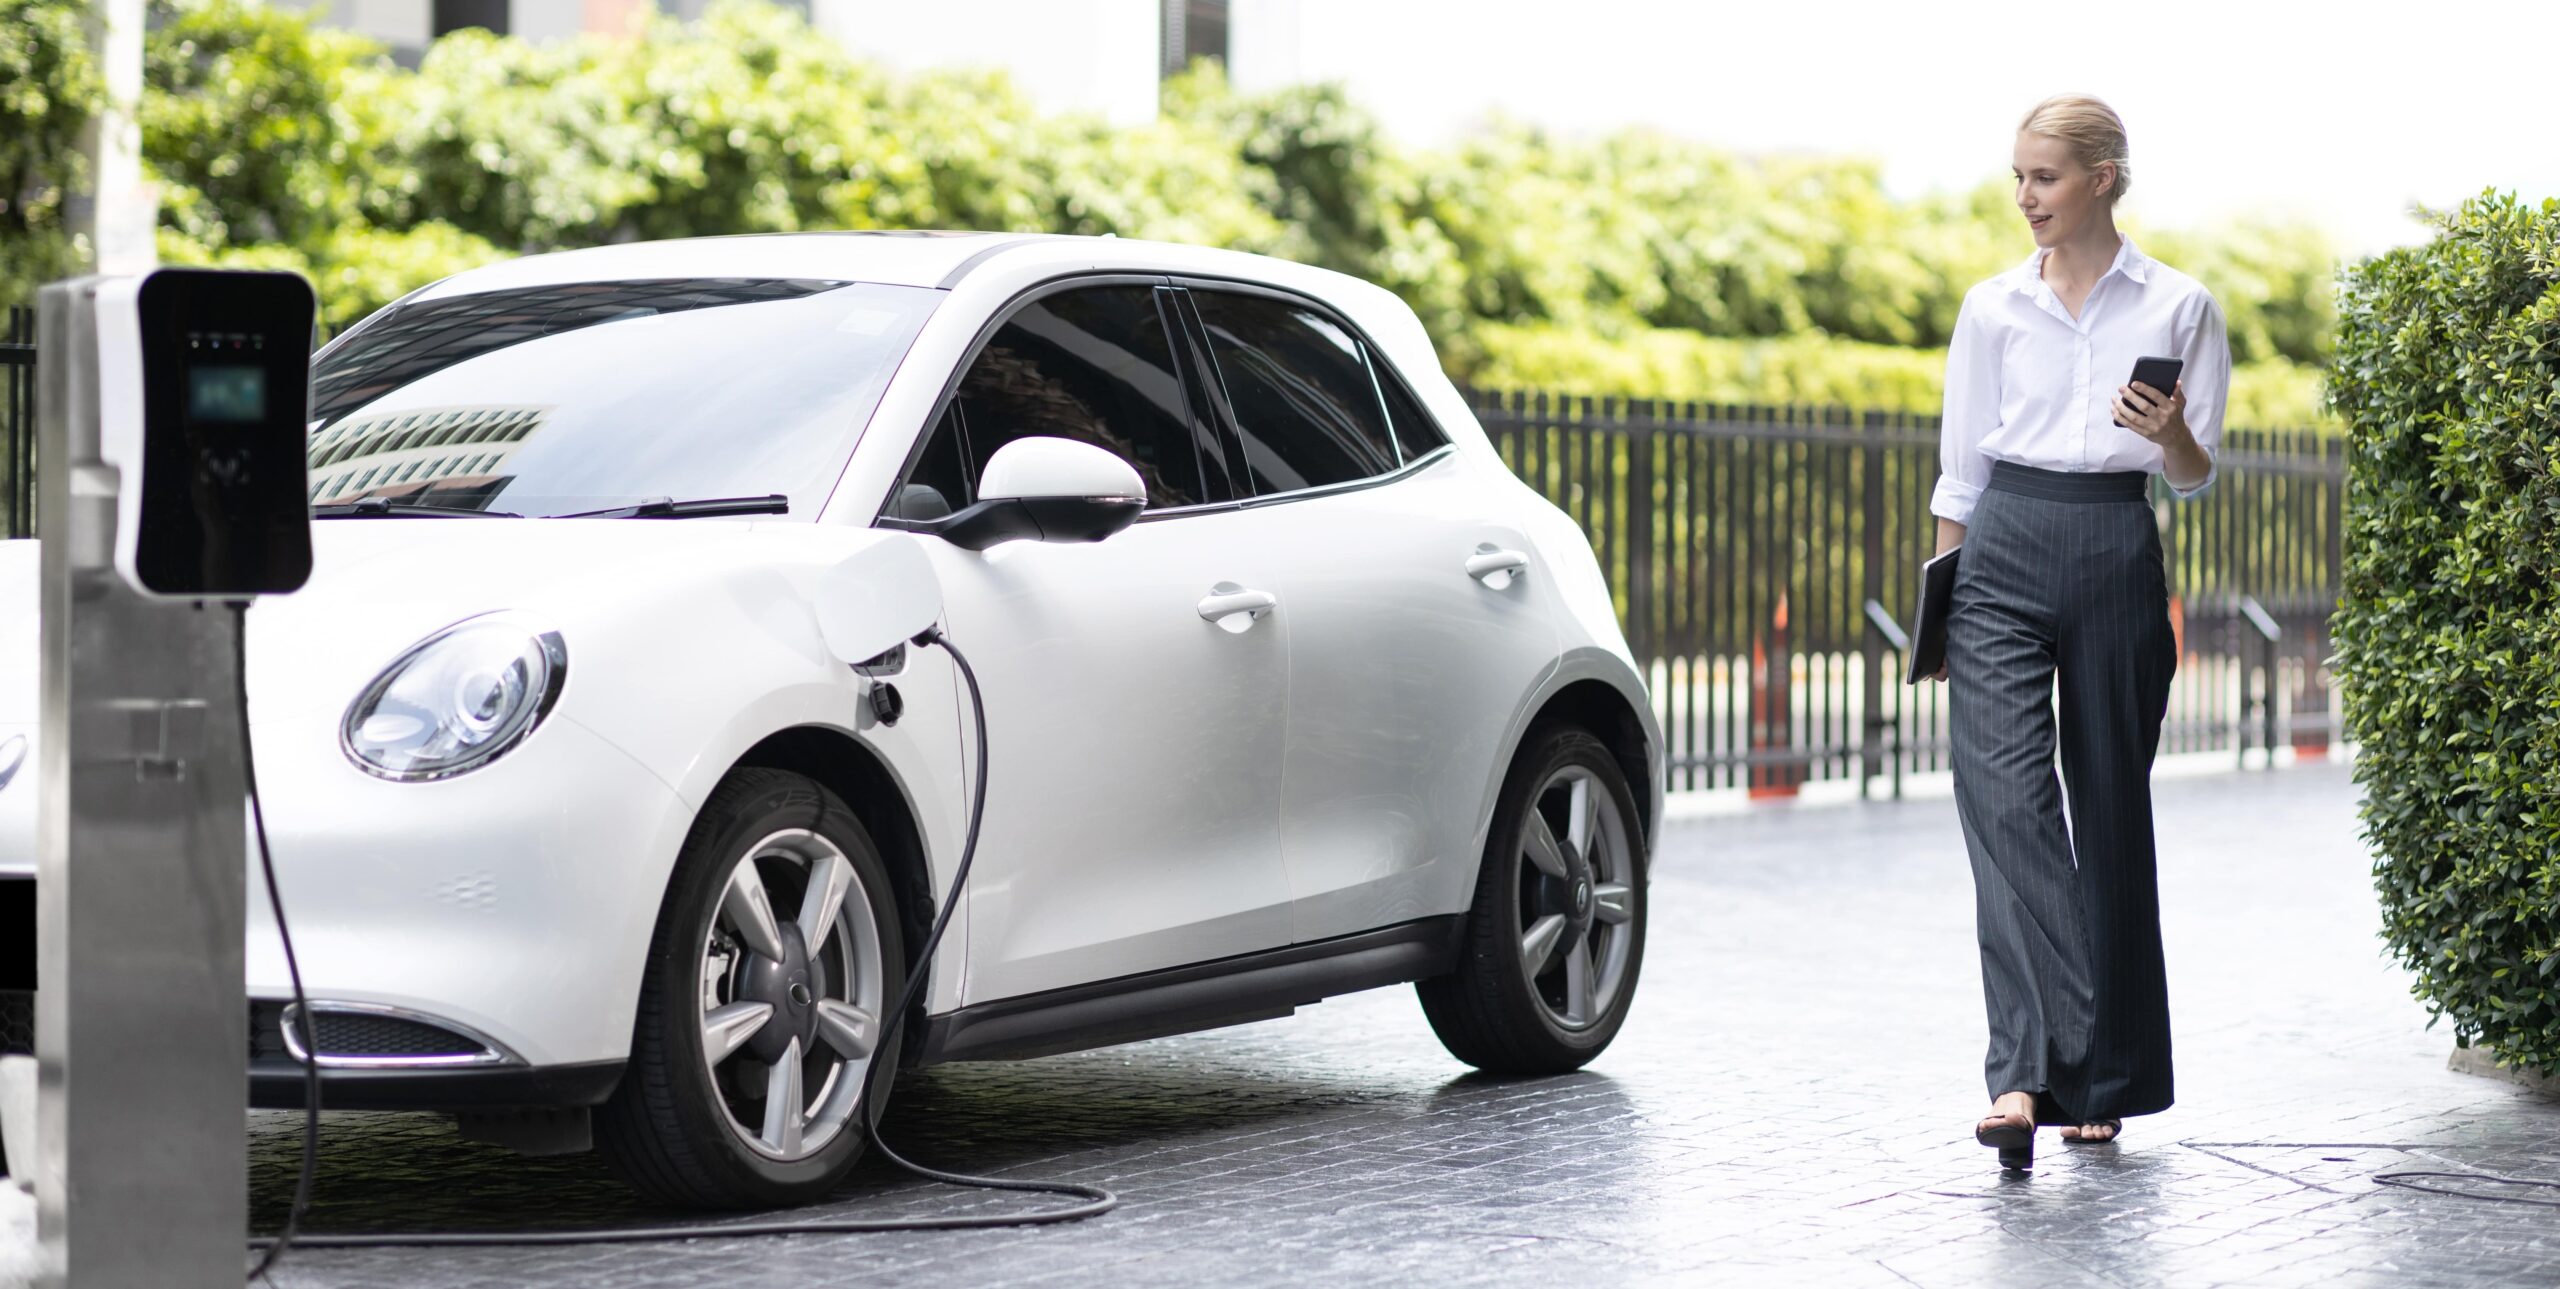 Installing an EV charging stations at home offers numerous benefits